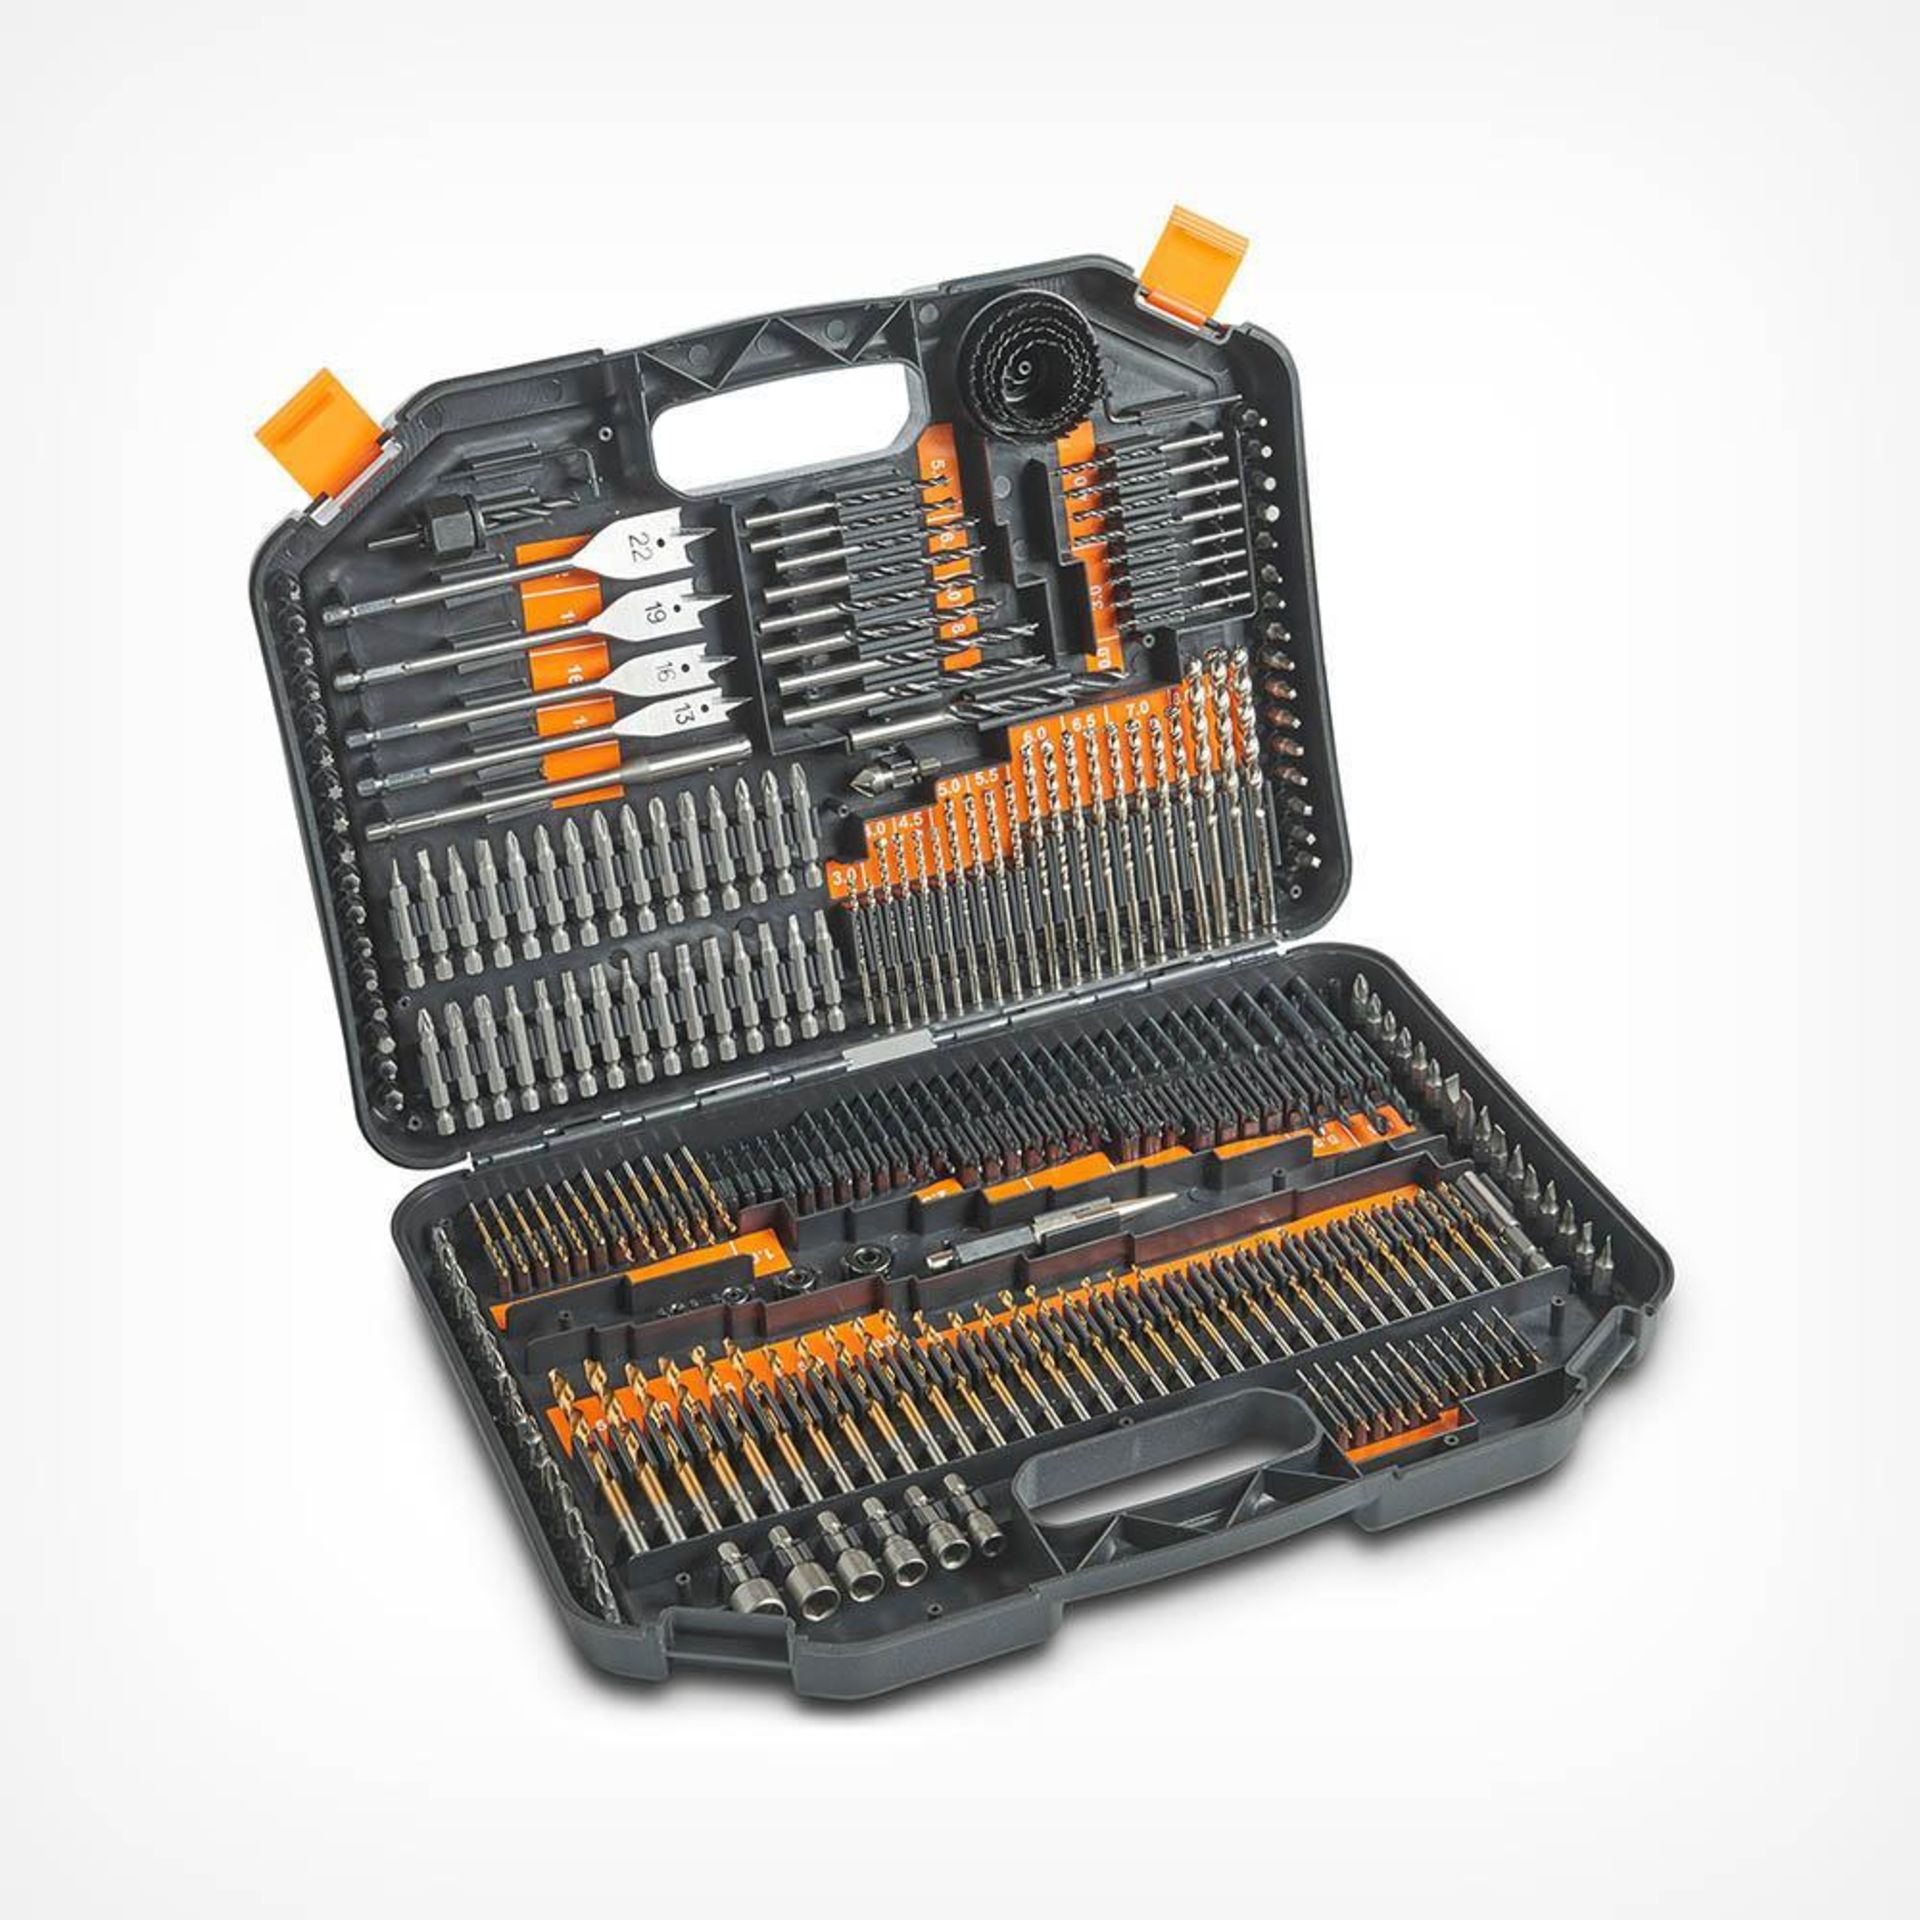 246pc Drill Bit Set - ER50. Whatever the job at hand, youâ€™ll always be prepared with the Luxury